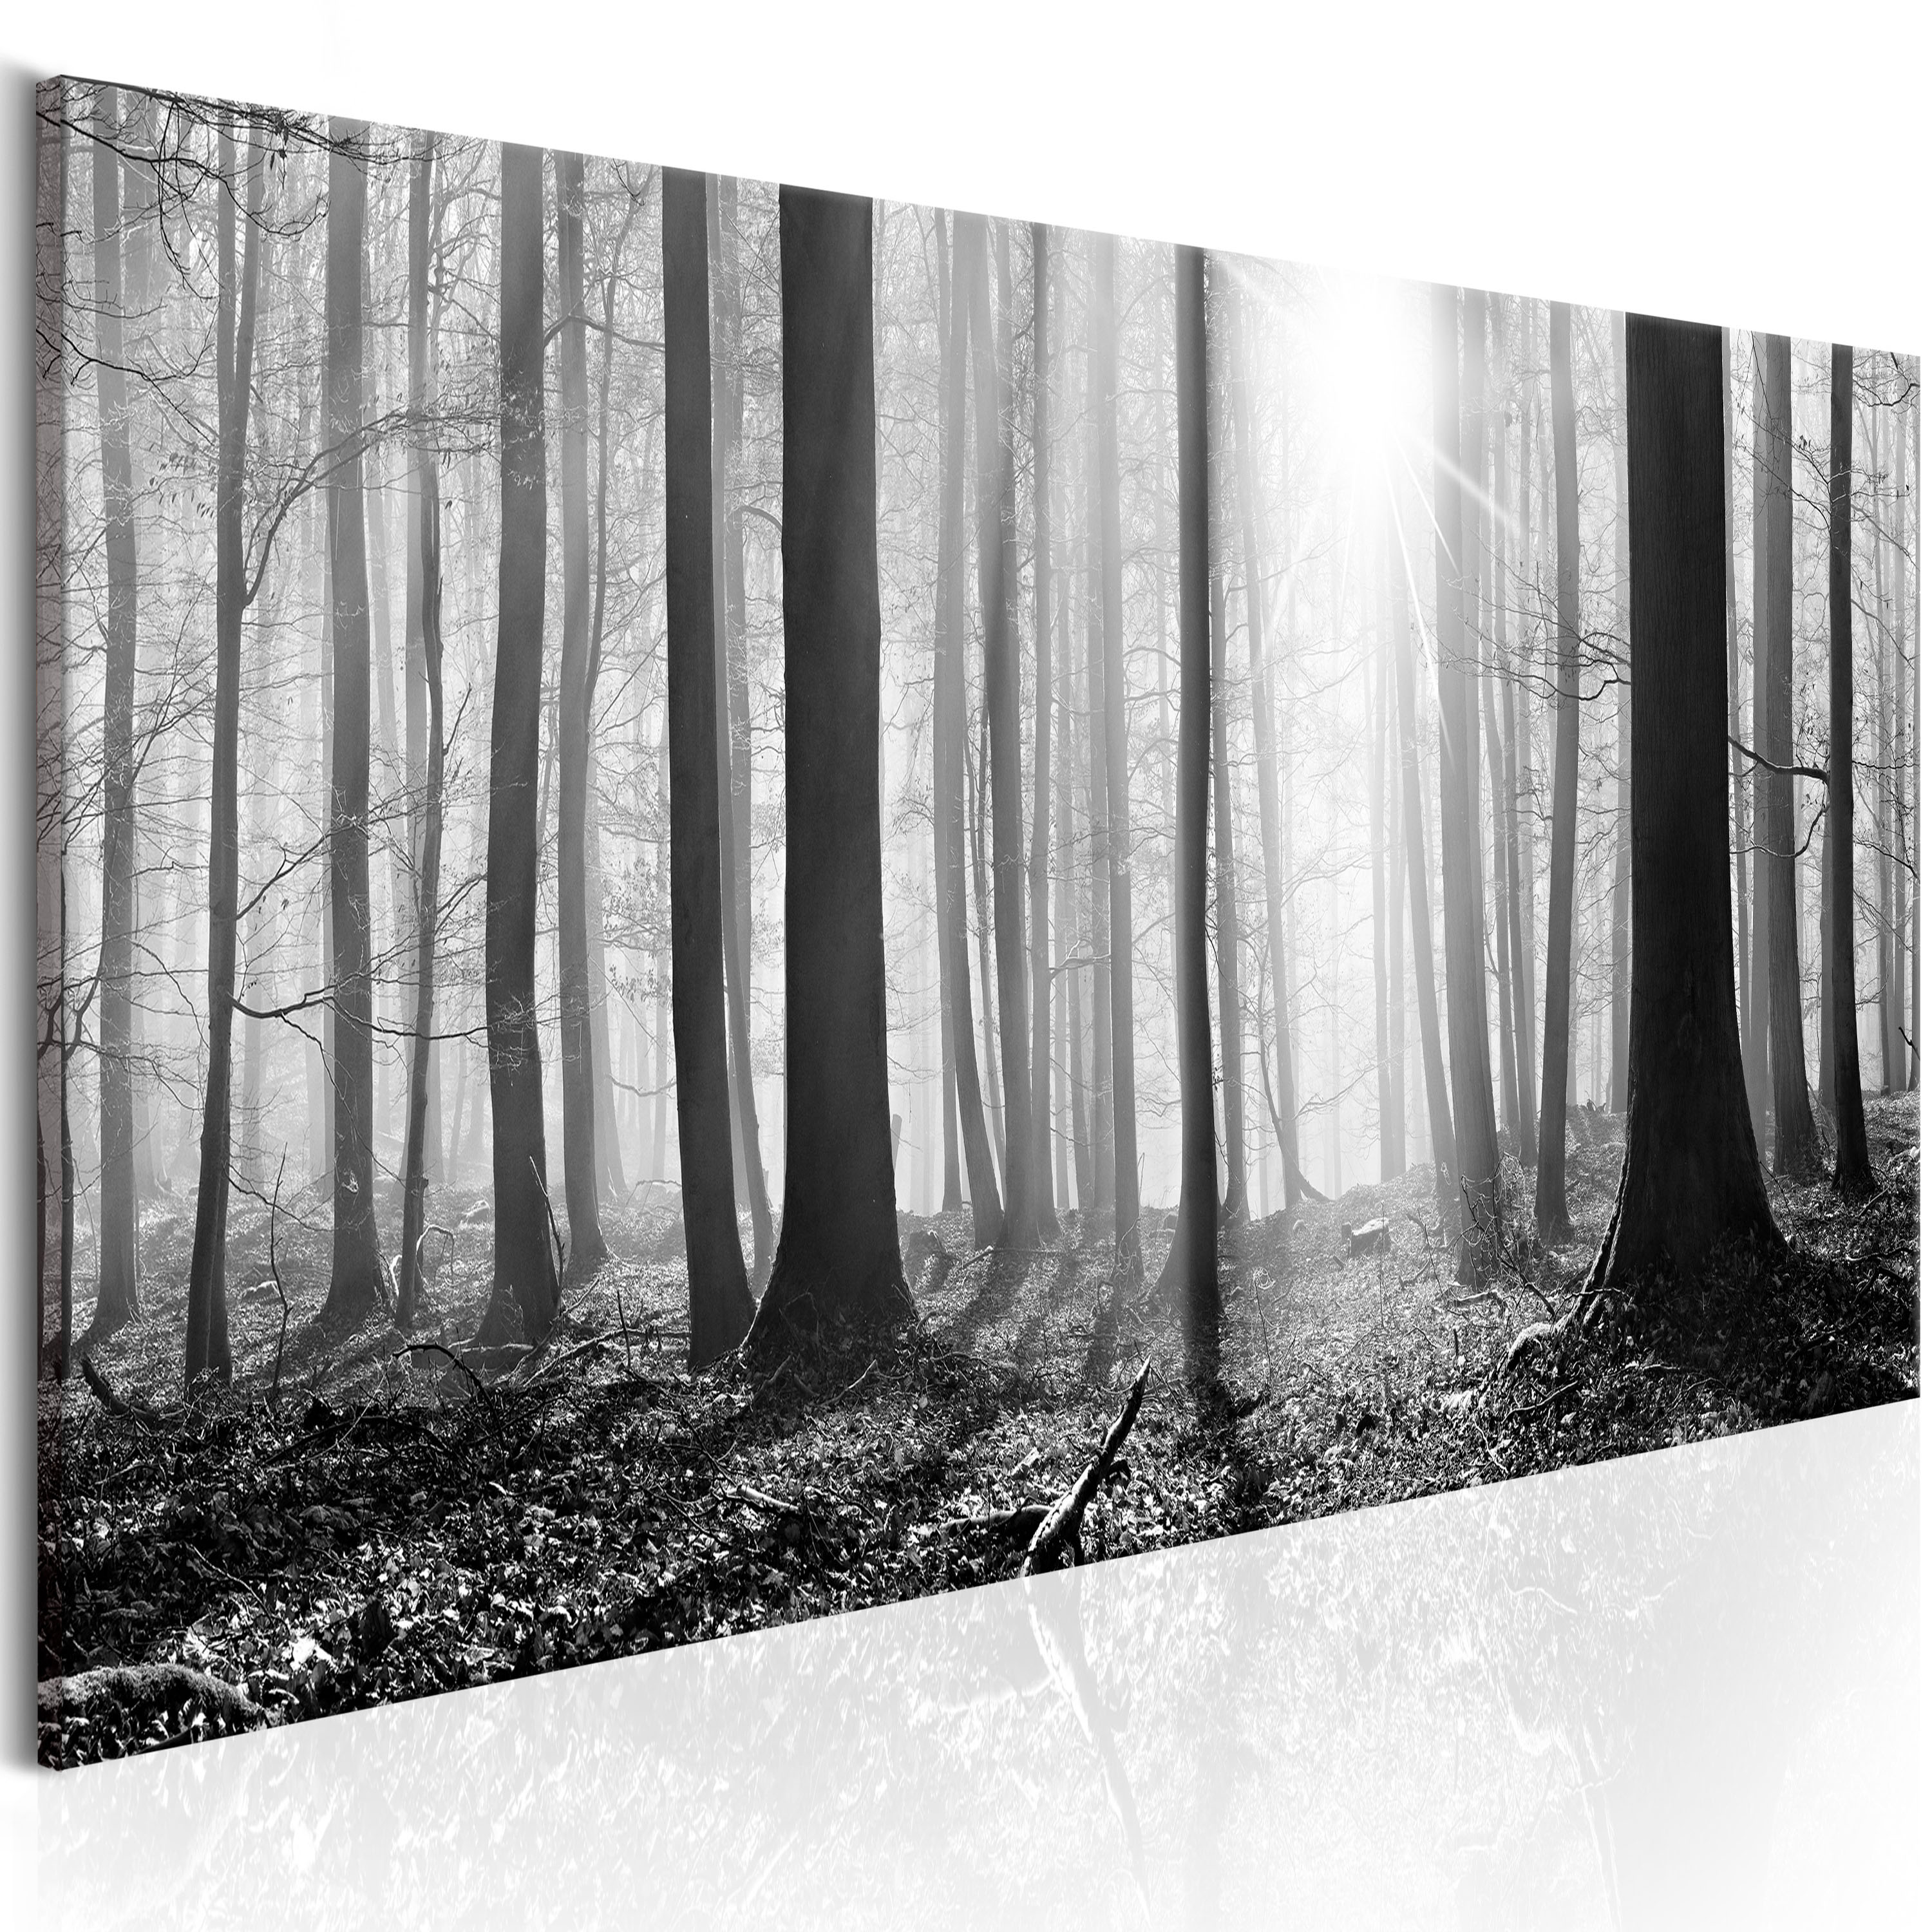 Canvas Print - Black and White Forest - 135x45